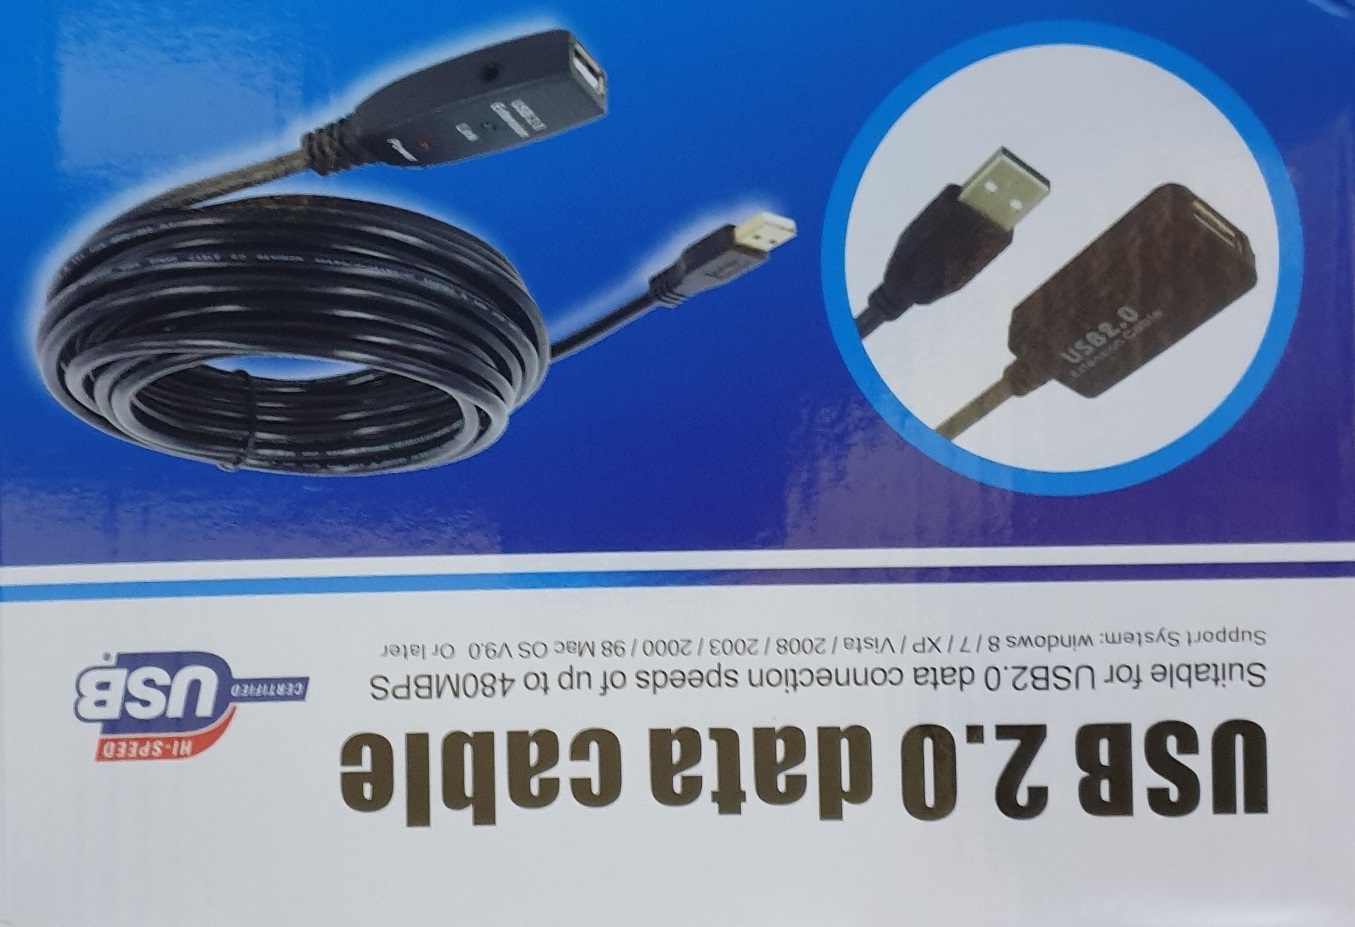  <b>USB 2.0 Cable:</b> 5M AM-AF Extension with Amplifer  